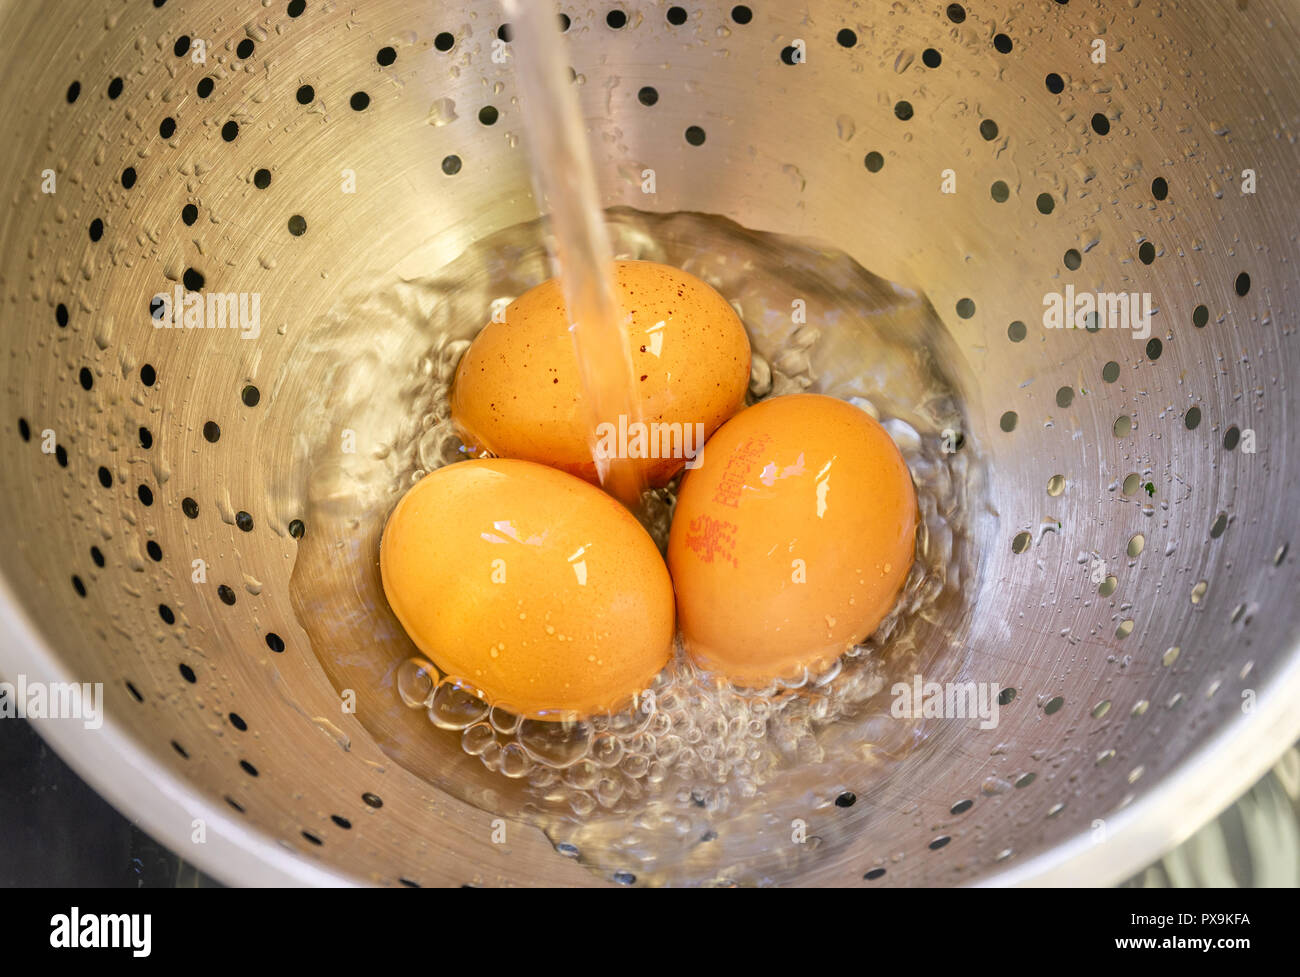 Quenching/ cooling freshly boiled eggs under cold running water after cooking Stock Photo